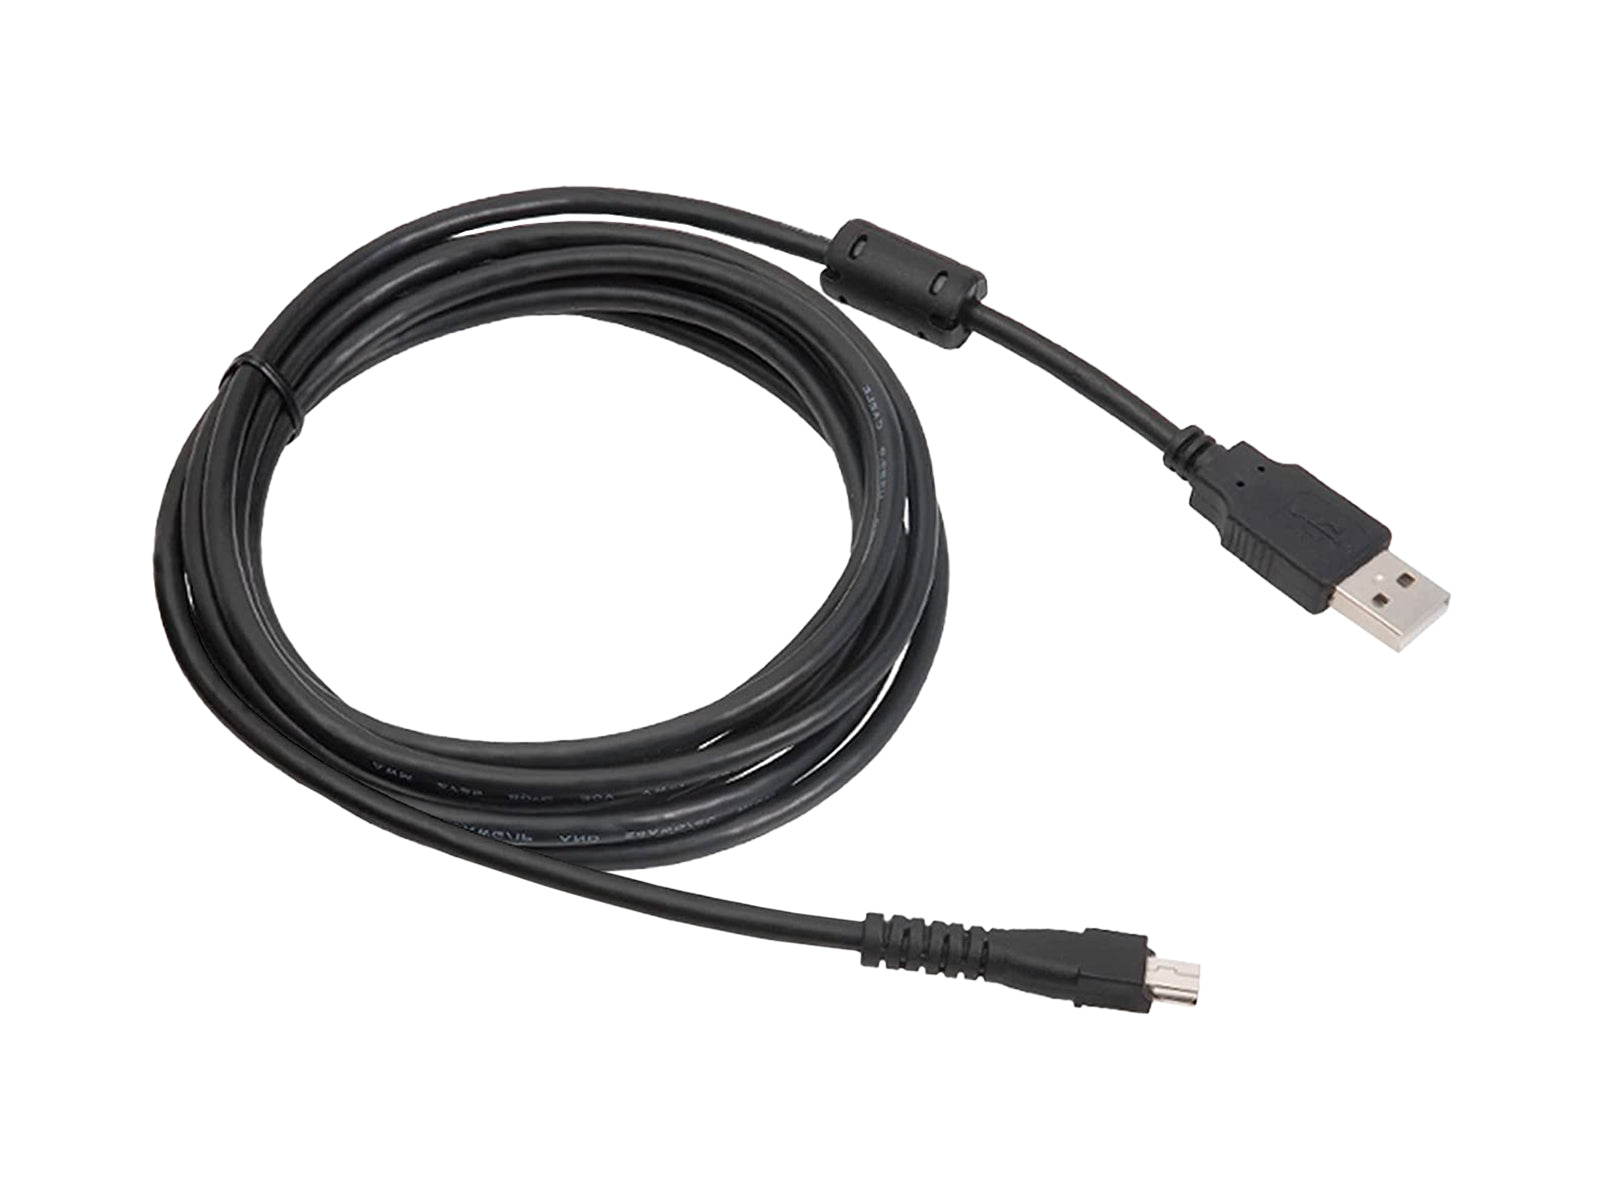 Philips Replacement USB Cable for Speechmike Microphones - 8ft | 2.4m (ACC0034) Monitors.com 